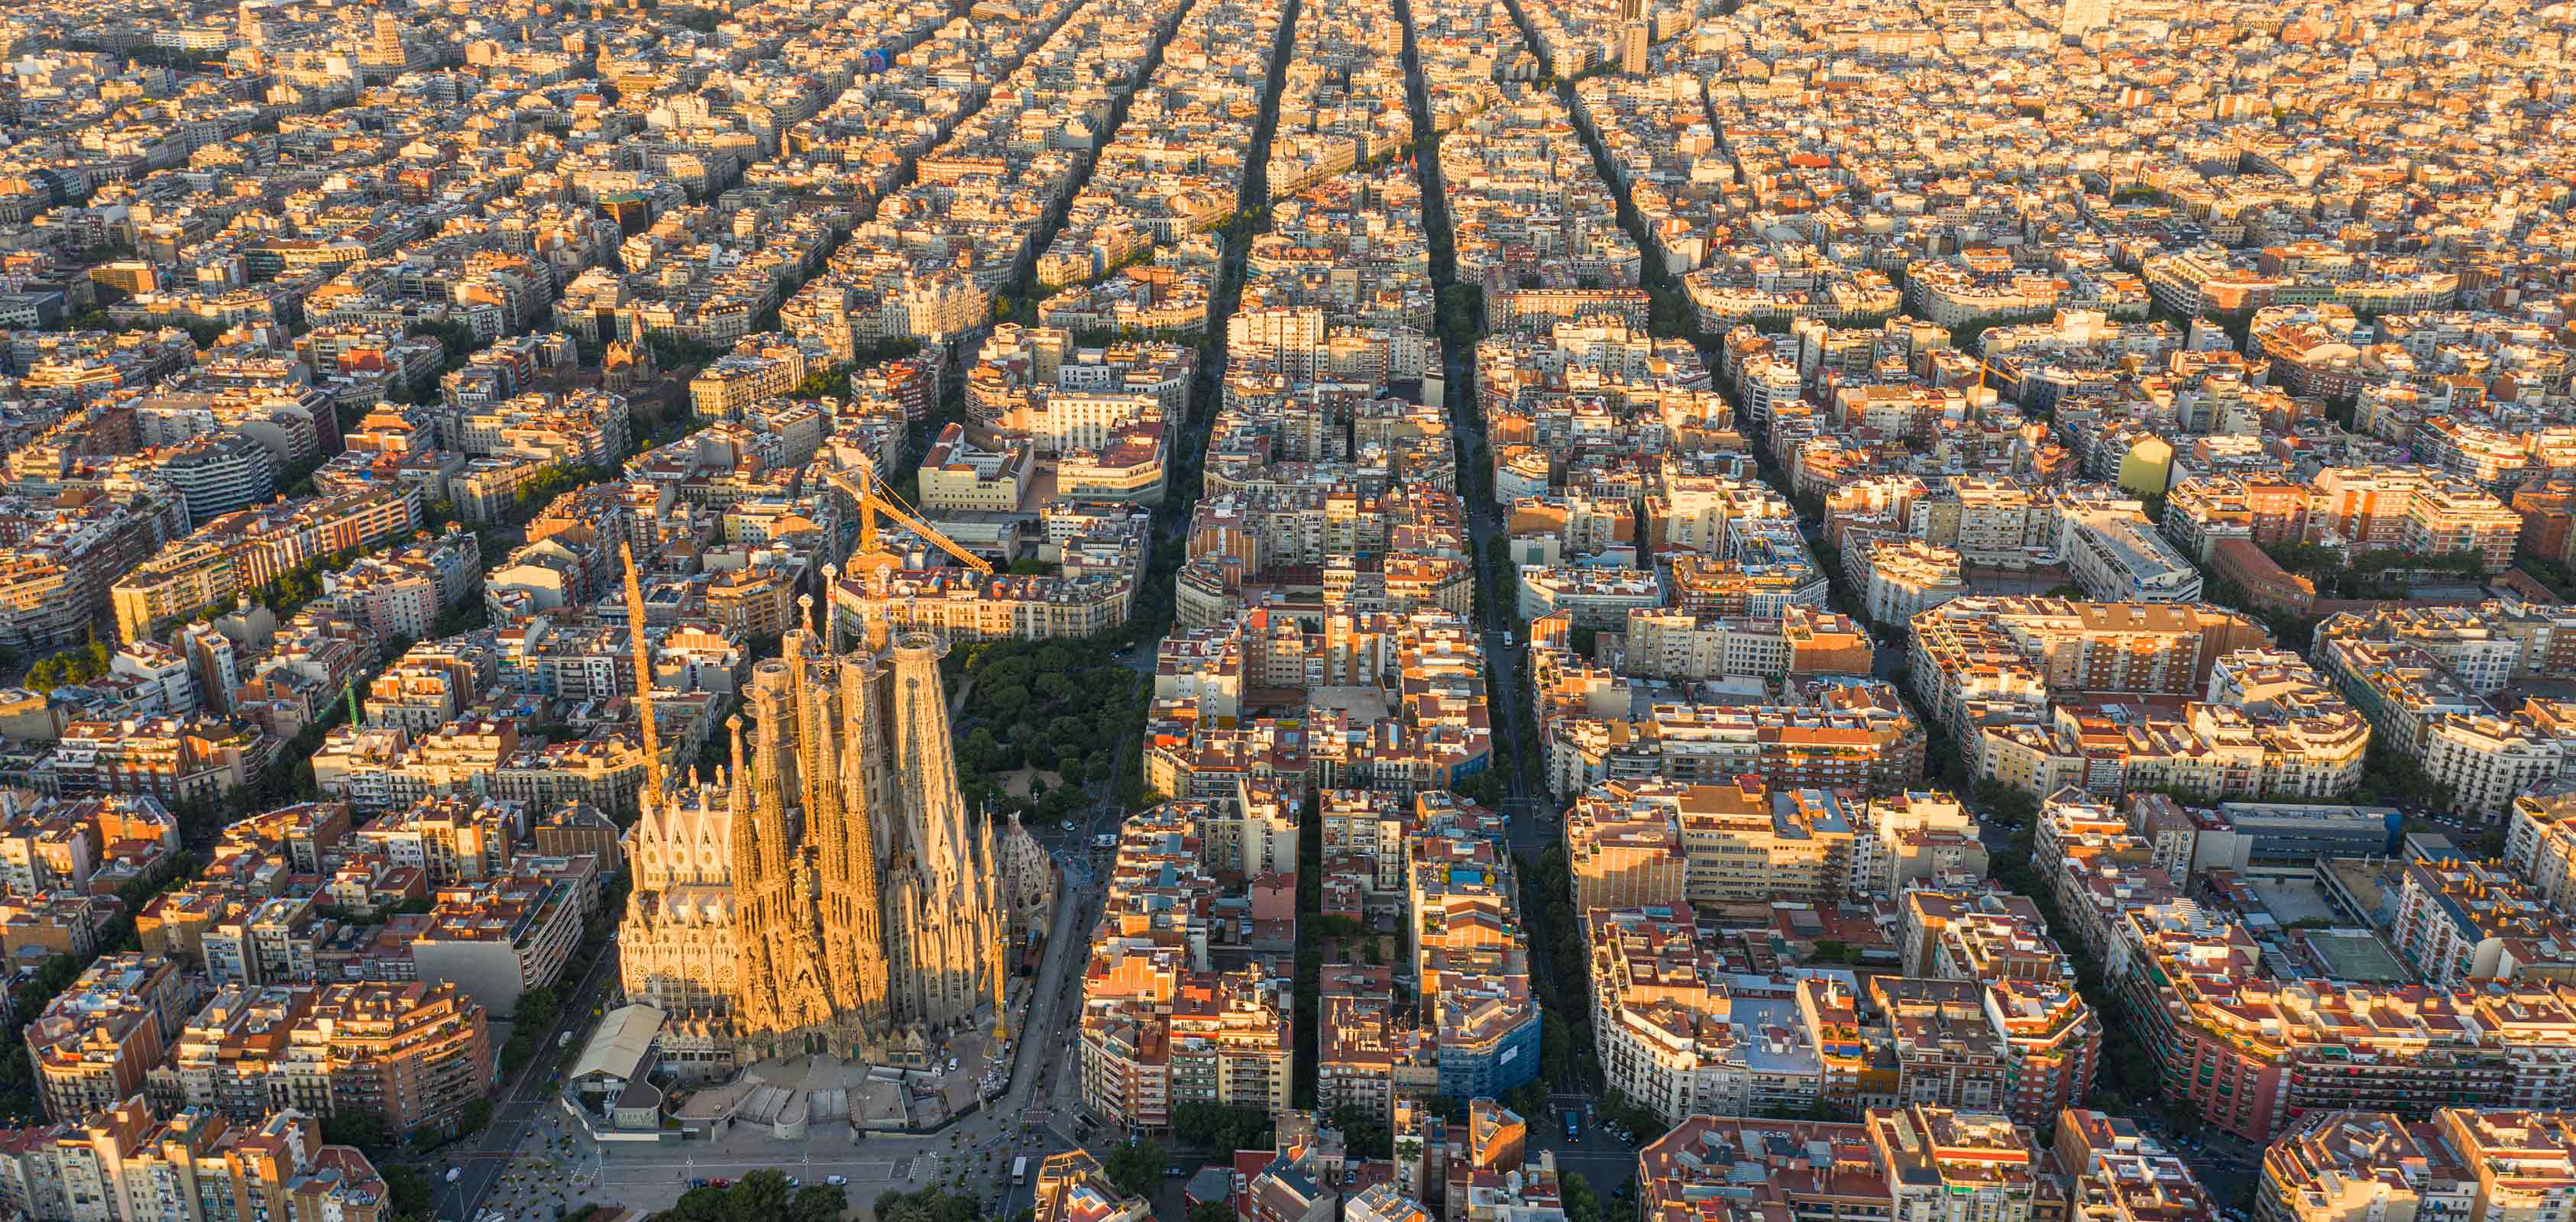 Aerial view of Barcelona city with Eixample district and Sagrada Familia cathedral pictured in the centre - SEAT Creative Living